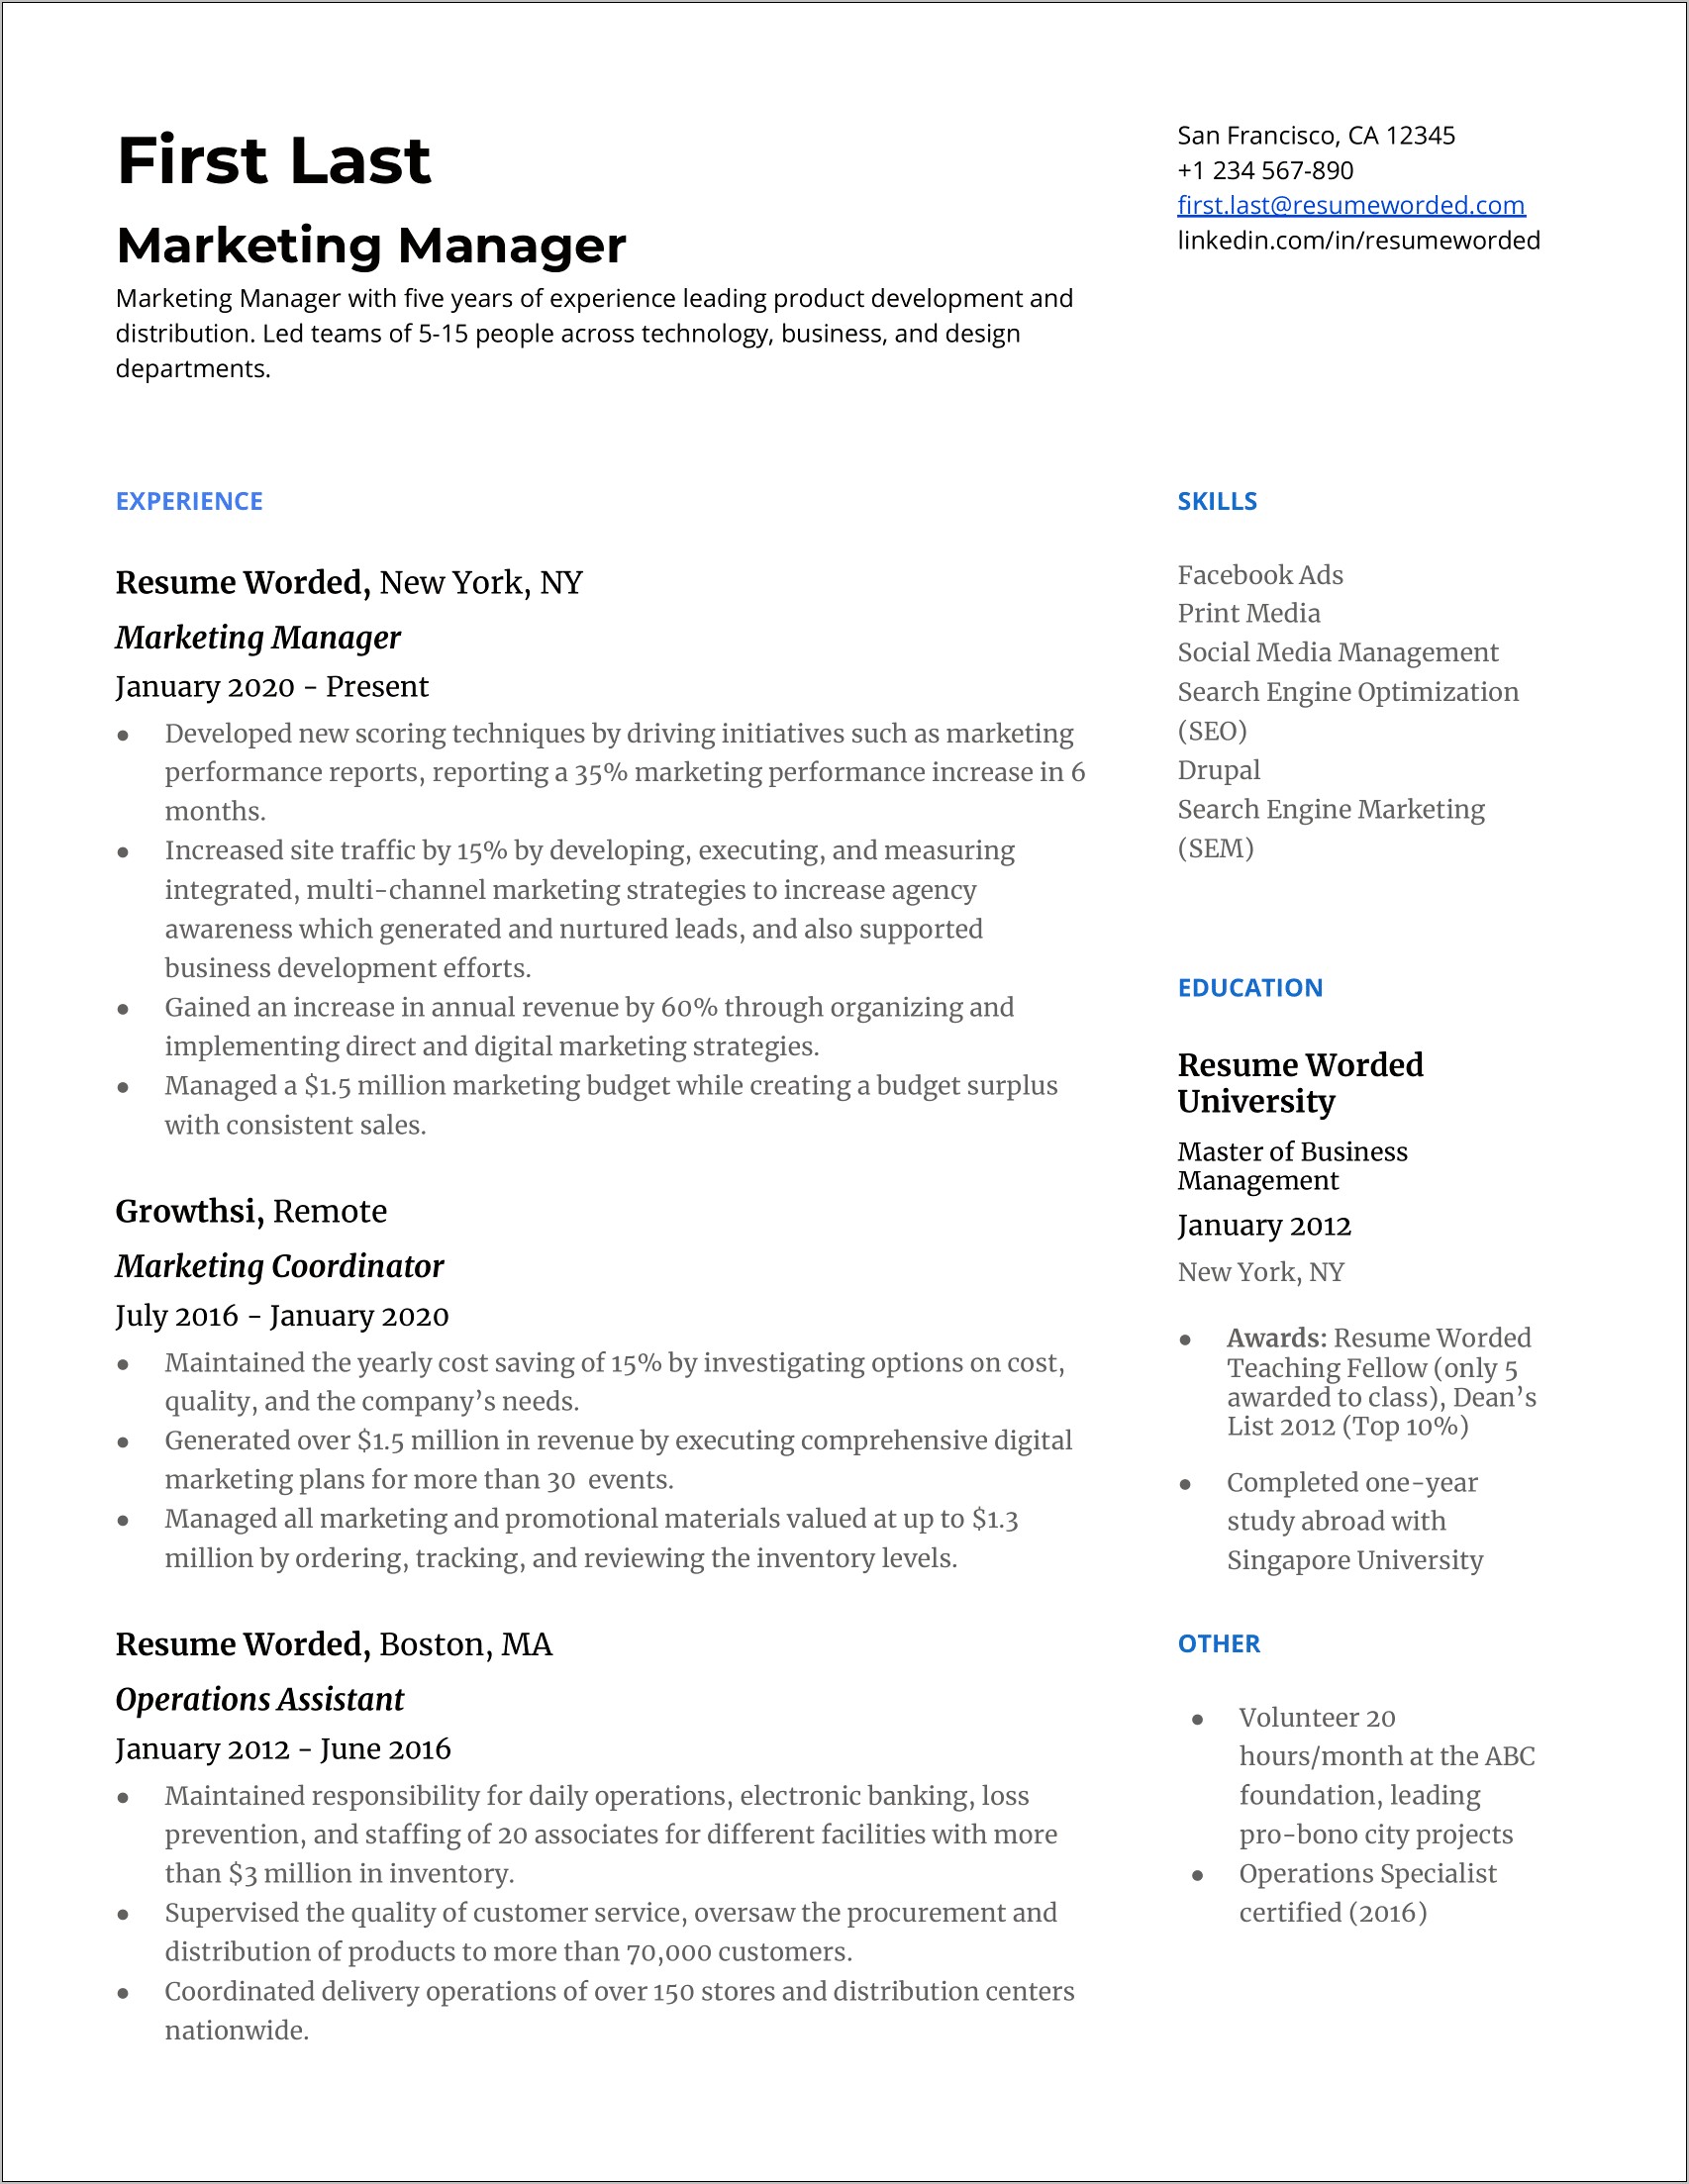 Resume Format For A Marketing Manager